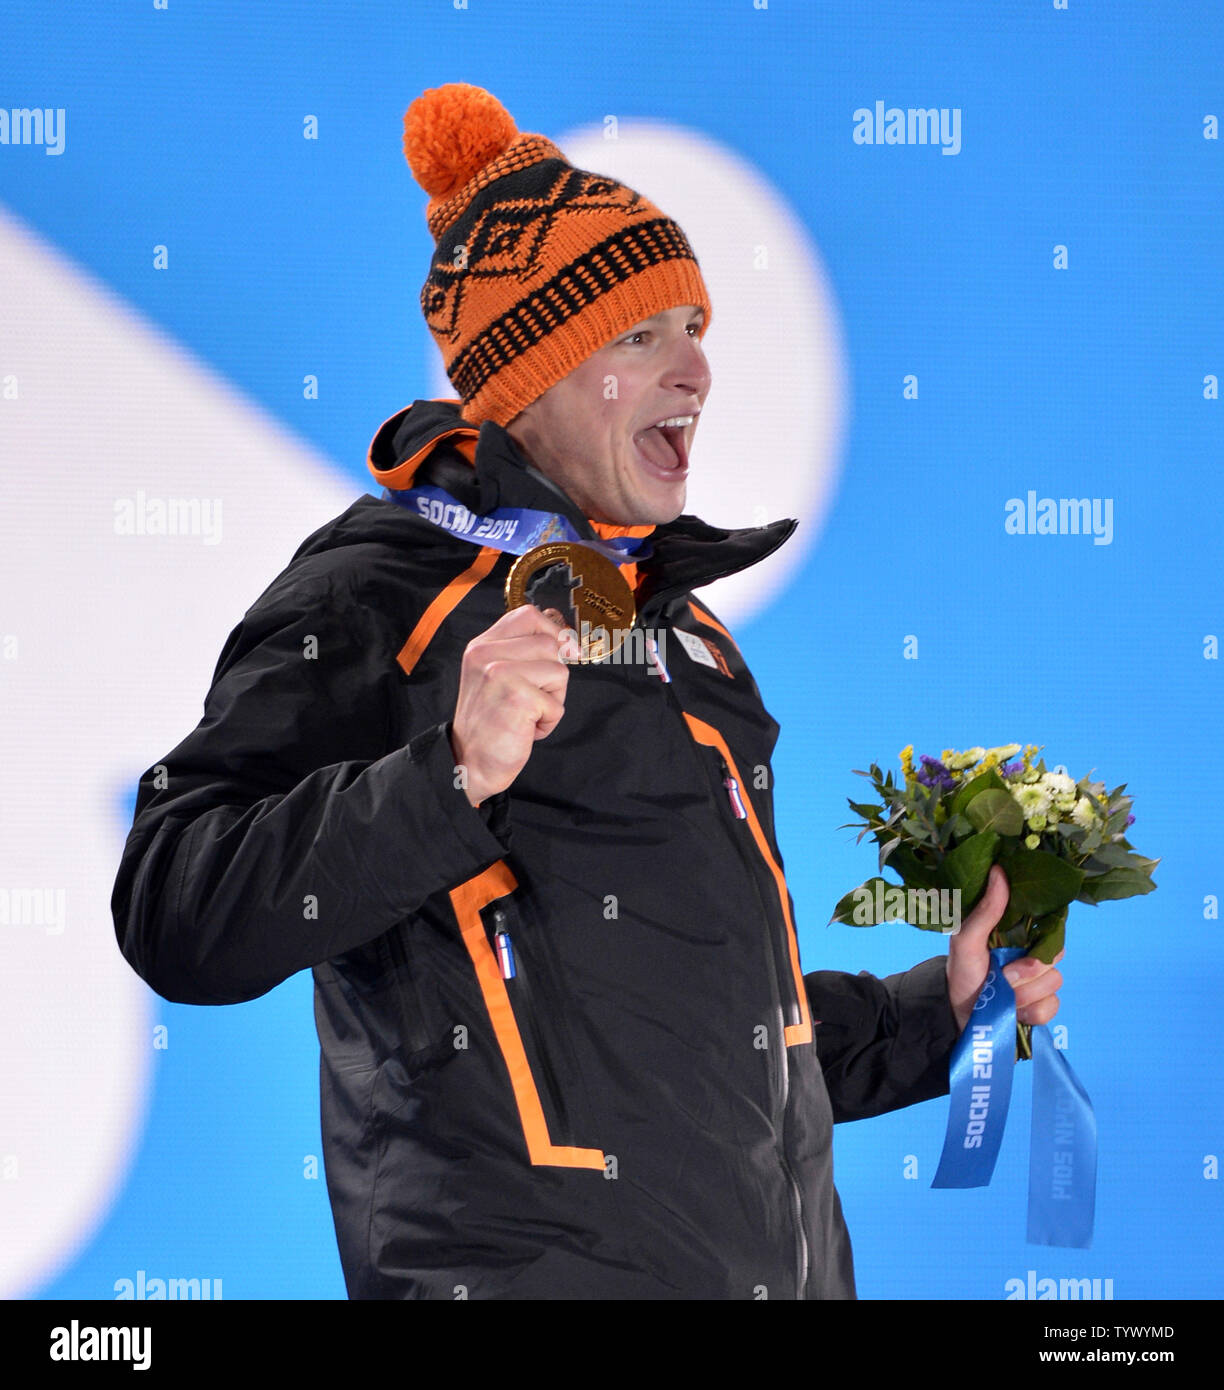 The Netherlands' Sven Kramer reacts after being presented with the gold medal for the Men's 5000m Speed Skating event during a victory ceremony at the Sochi 2014 Winter Olympics on February 9, 2014 in Sochi, Russia.     UPI/Kevin Dietsch Stock Photo